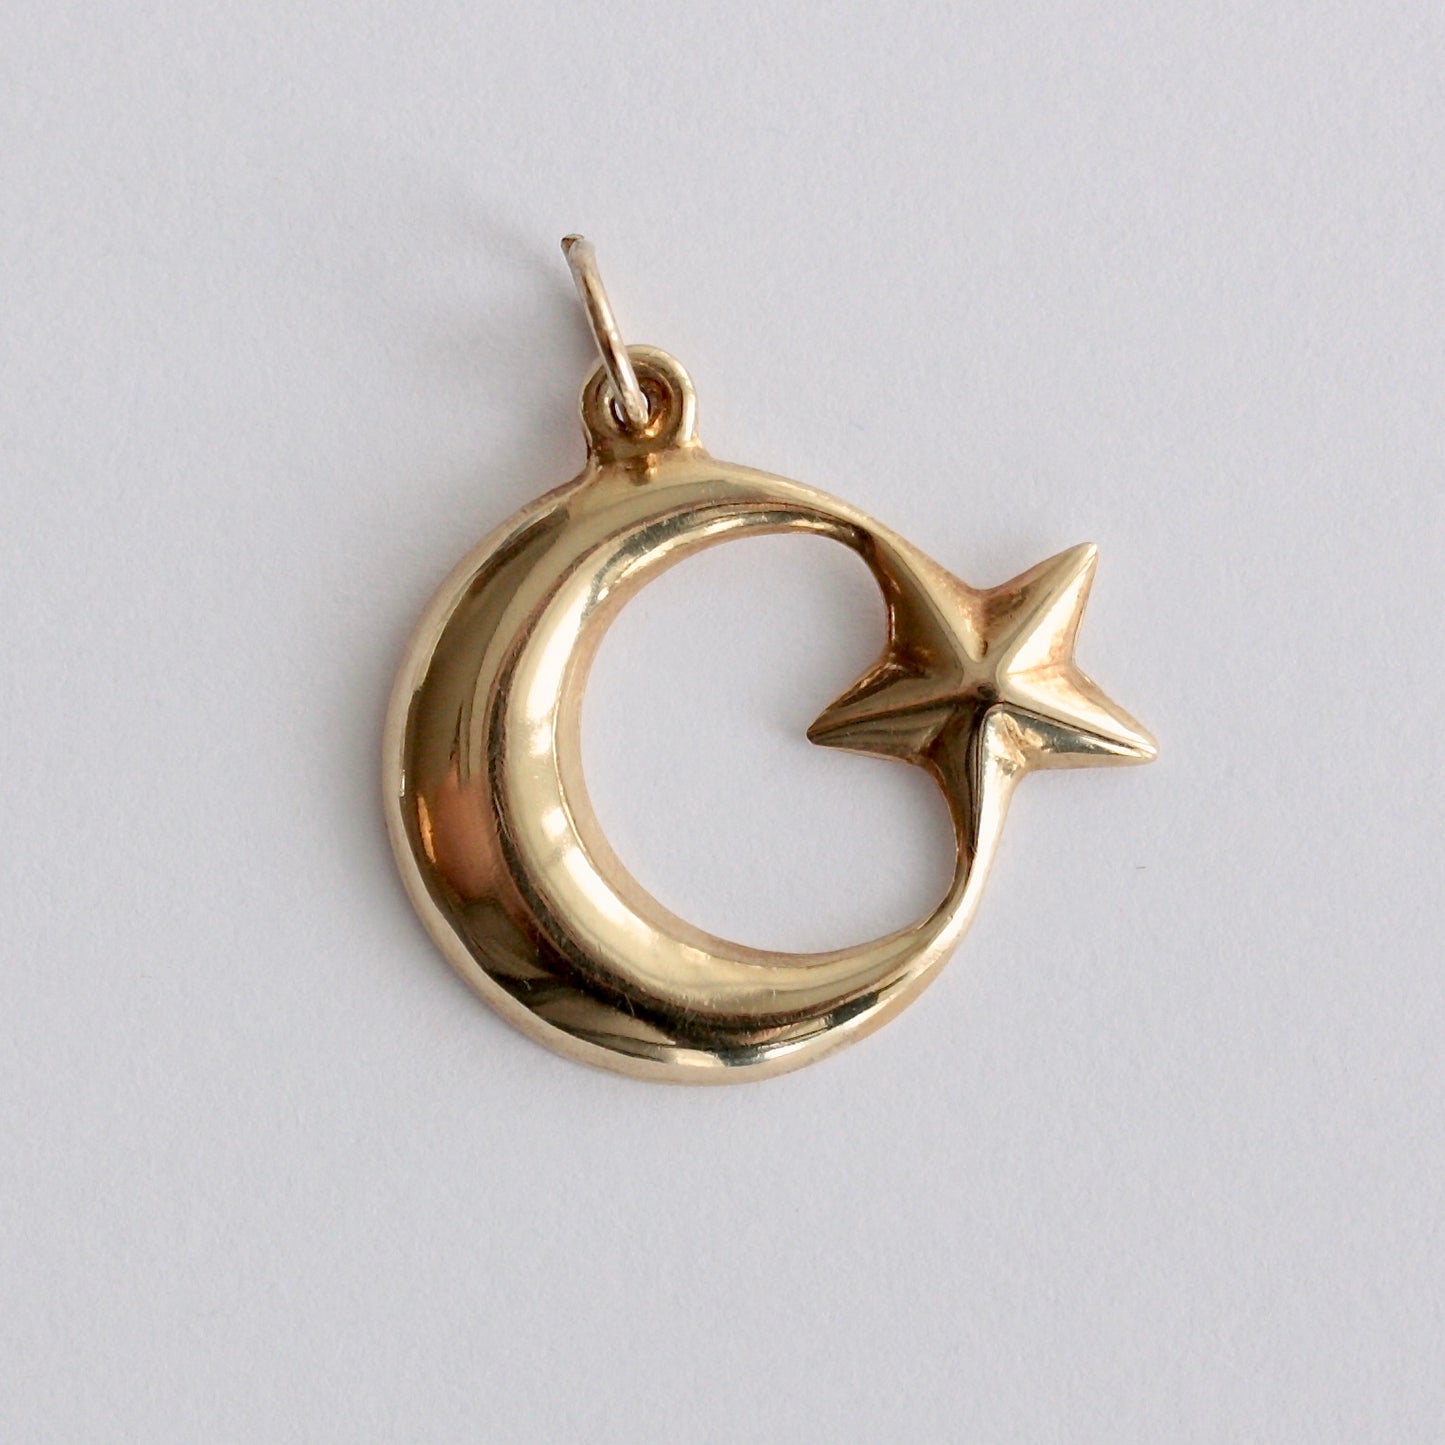 Vintage Yellow Gold Crescent Moon and Star Pendant